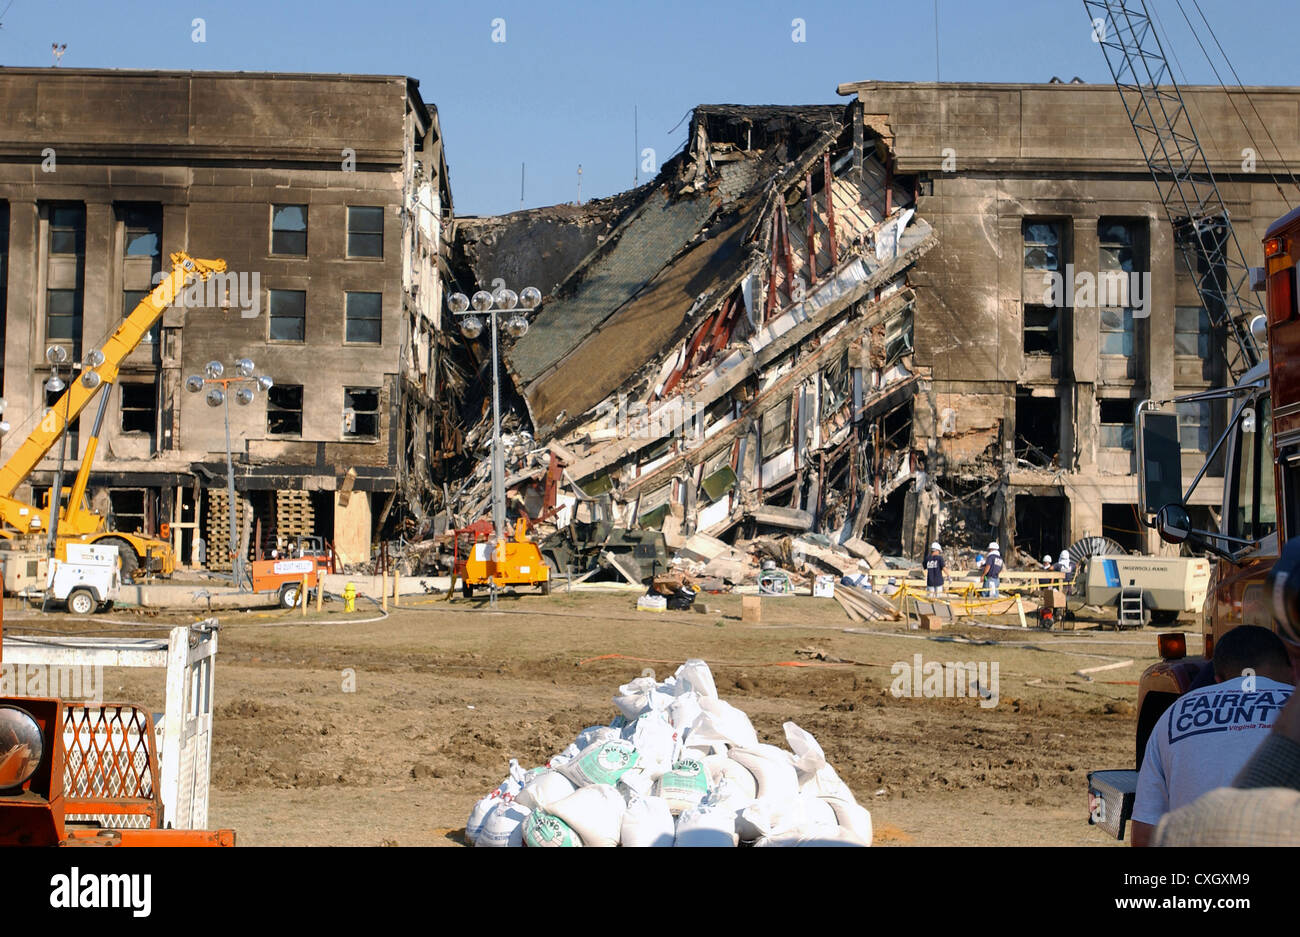 Collapsed section of the Pentagon destroyed by a terrorist attack as recovery efforts continue September 13, 2001. On September 11th American Airlines Flight 77 hijacked by terrorists fly into the building killing all 64 passengers onboard and 125 people on the ground. Stock Photo